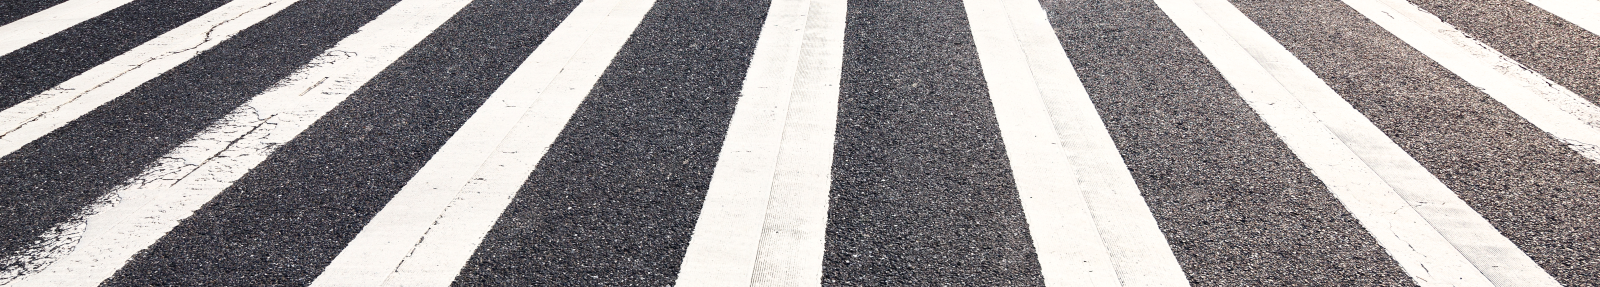 white stripes on road to signify pedestrian crossing